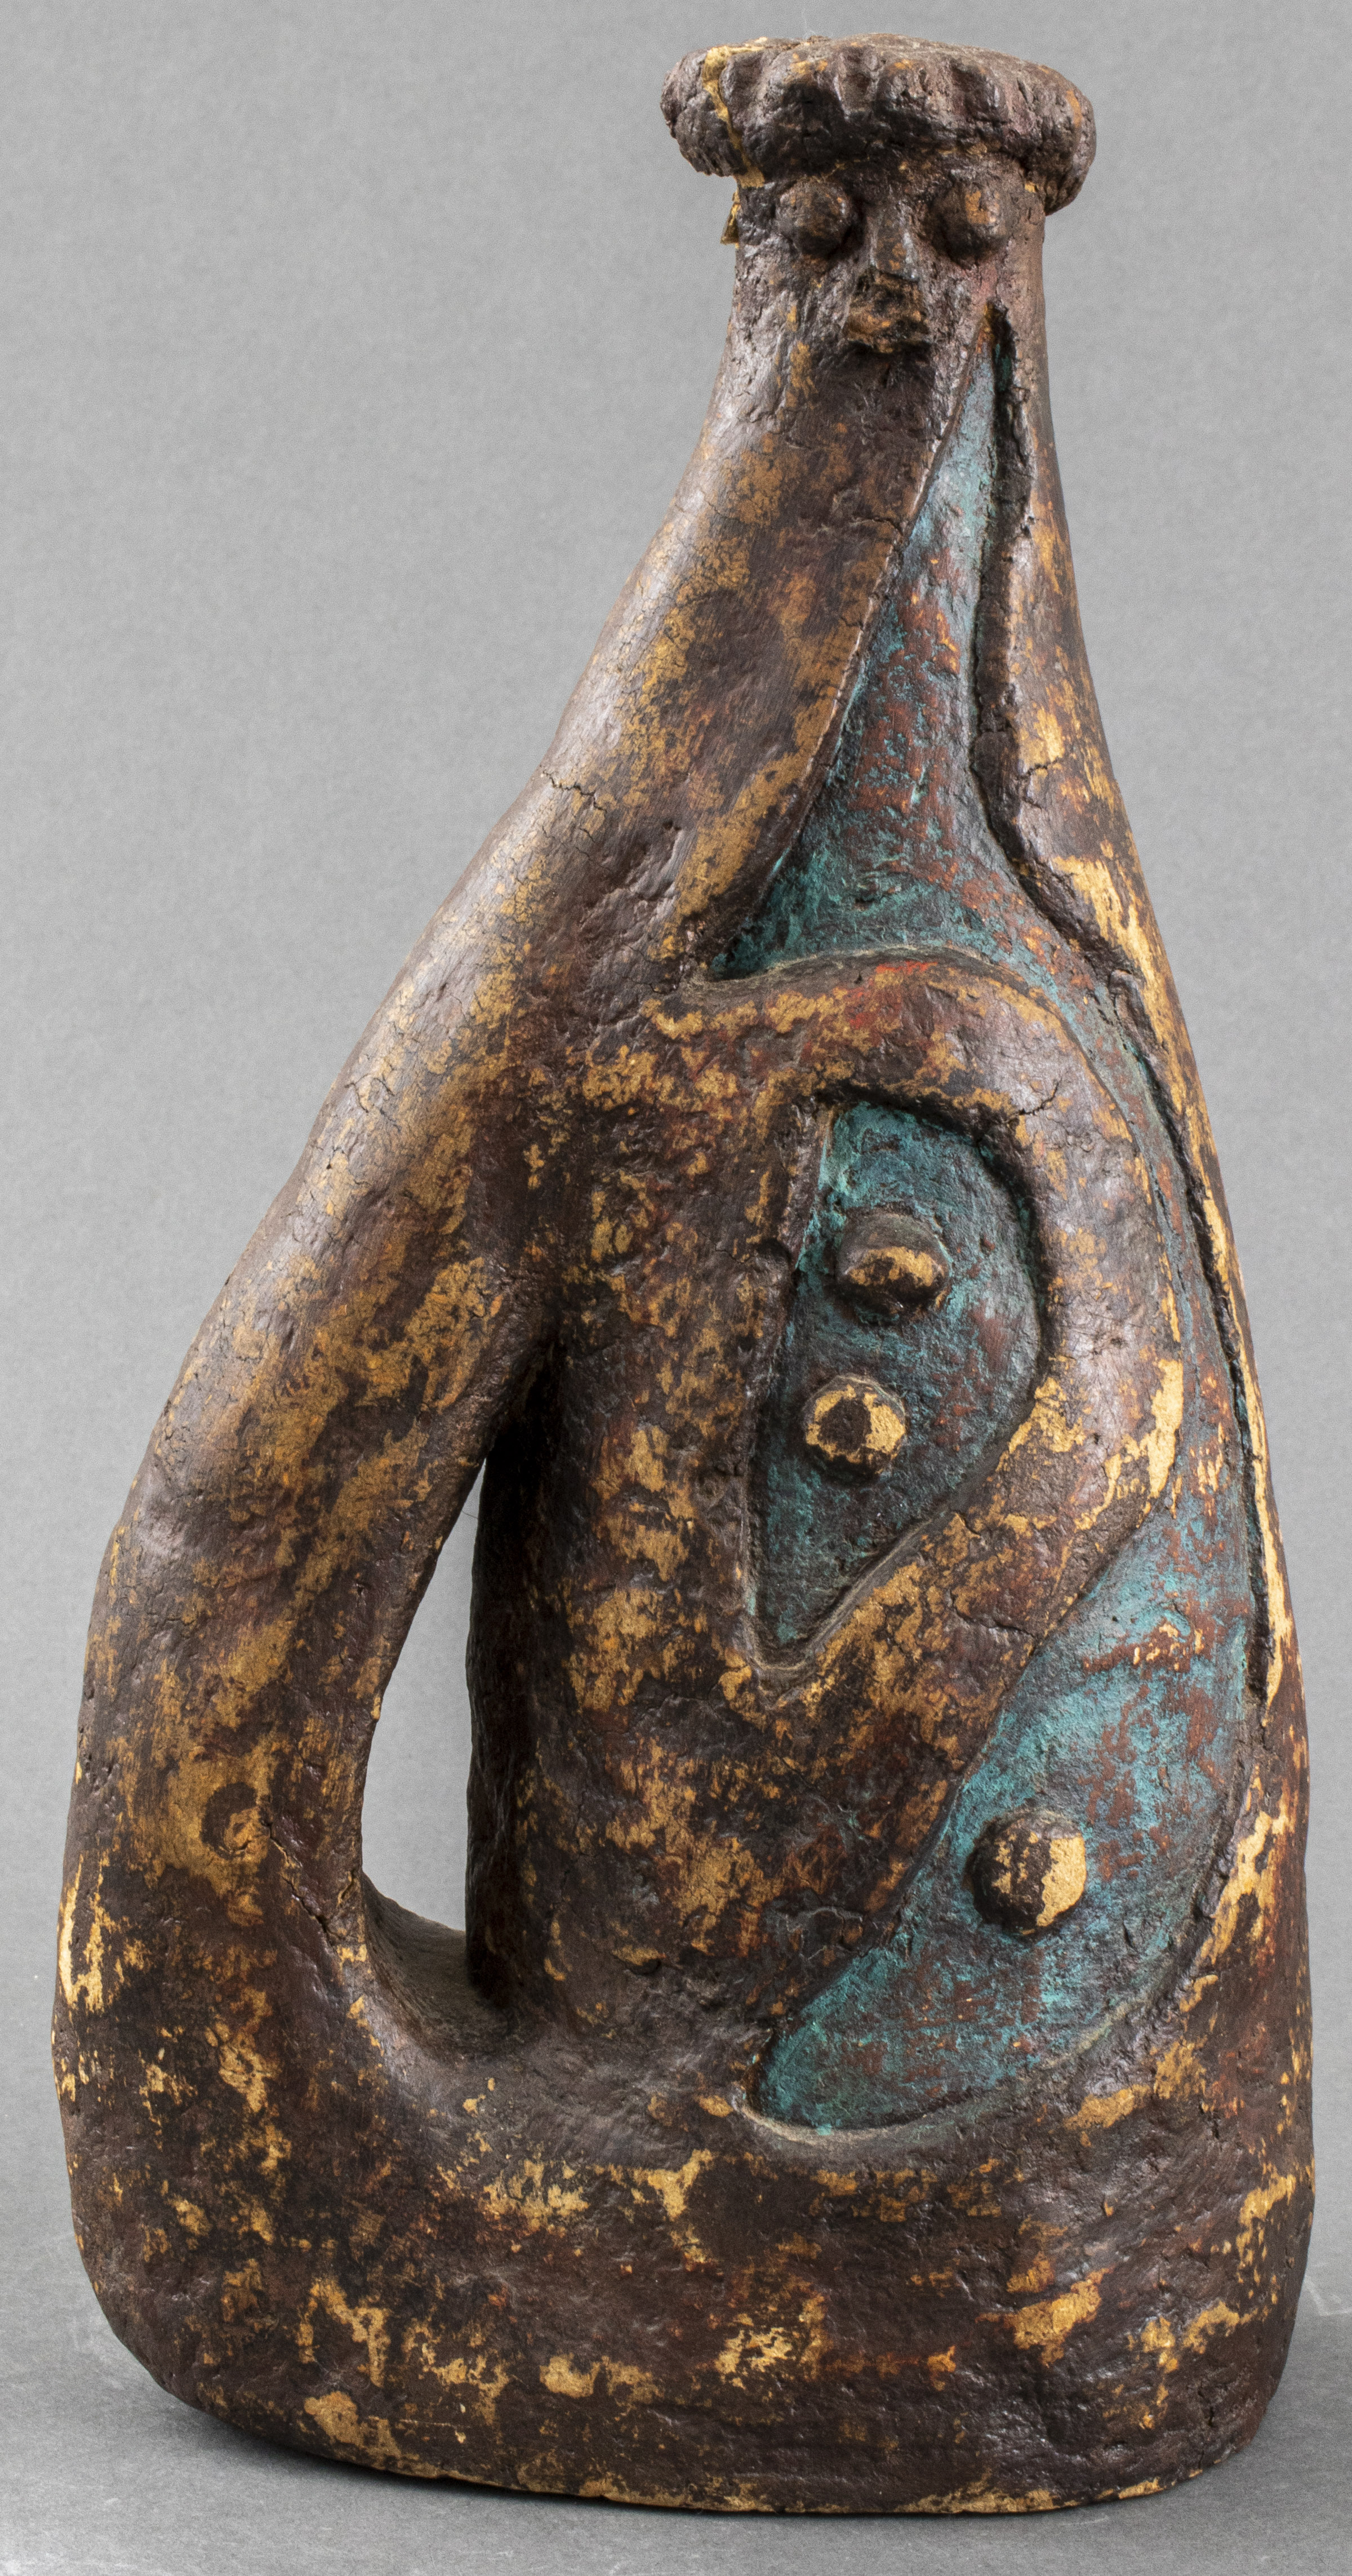 CORK COVERED DECORATED JUG FORM 3c4905